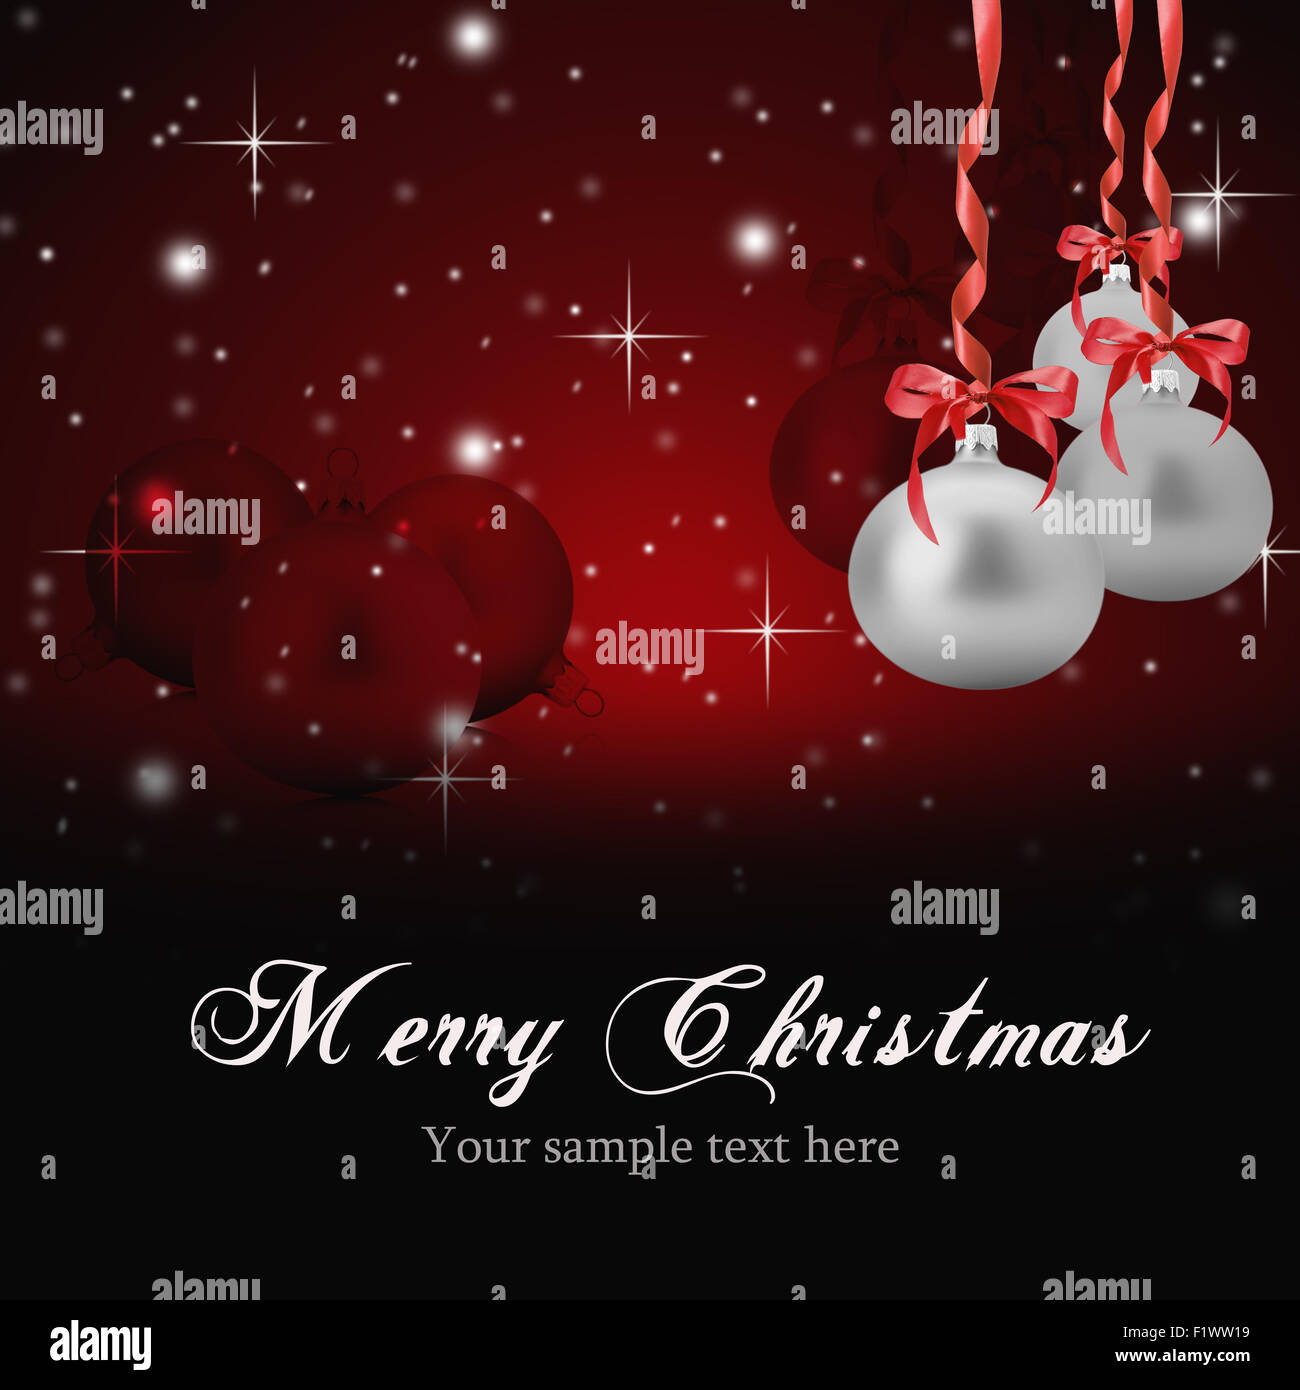 Merry Christmas greeting card. Foto Stock